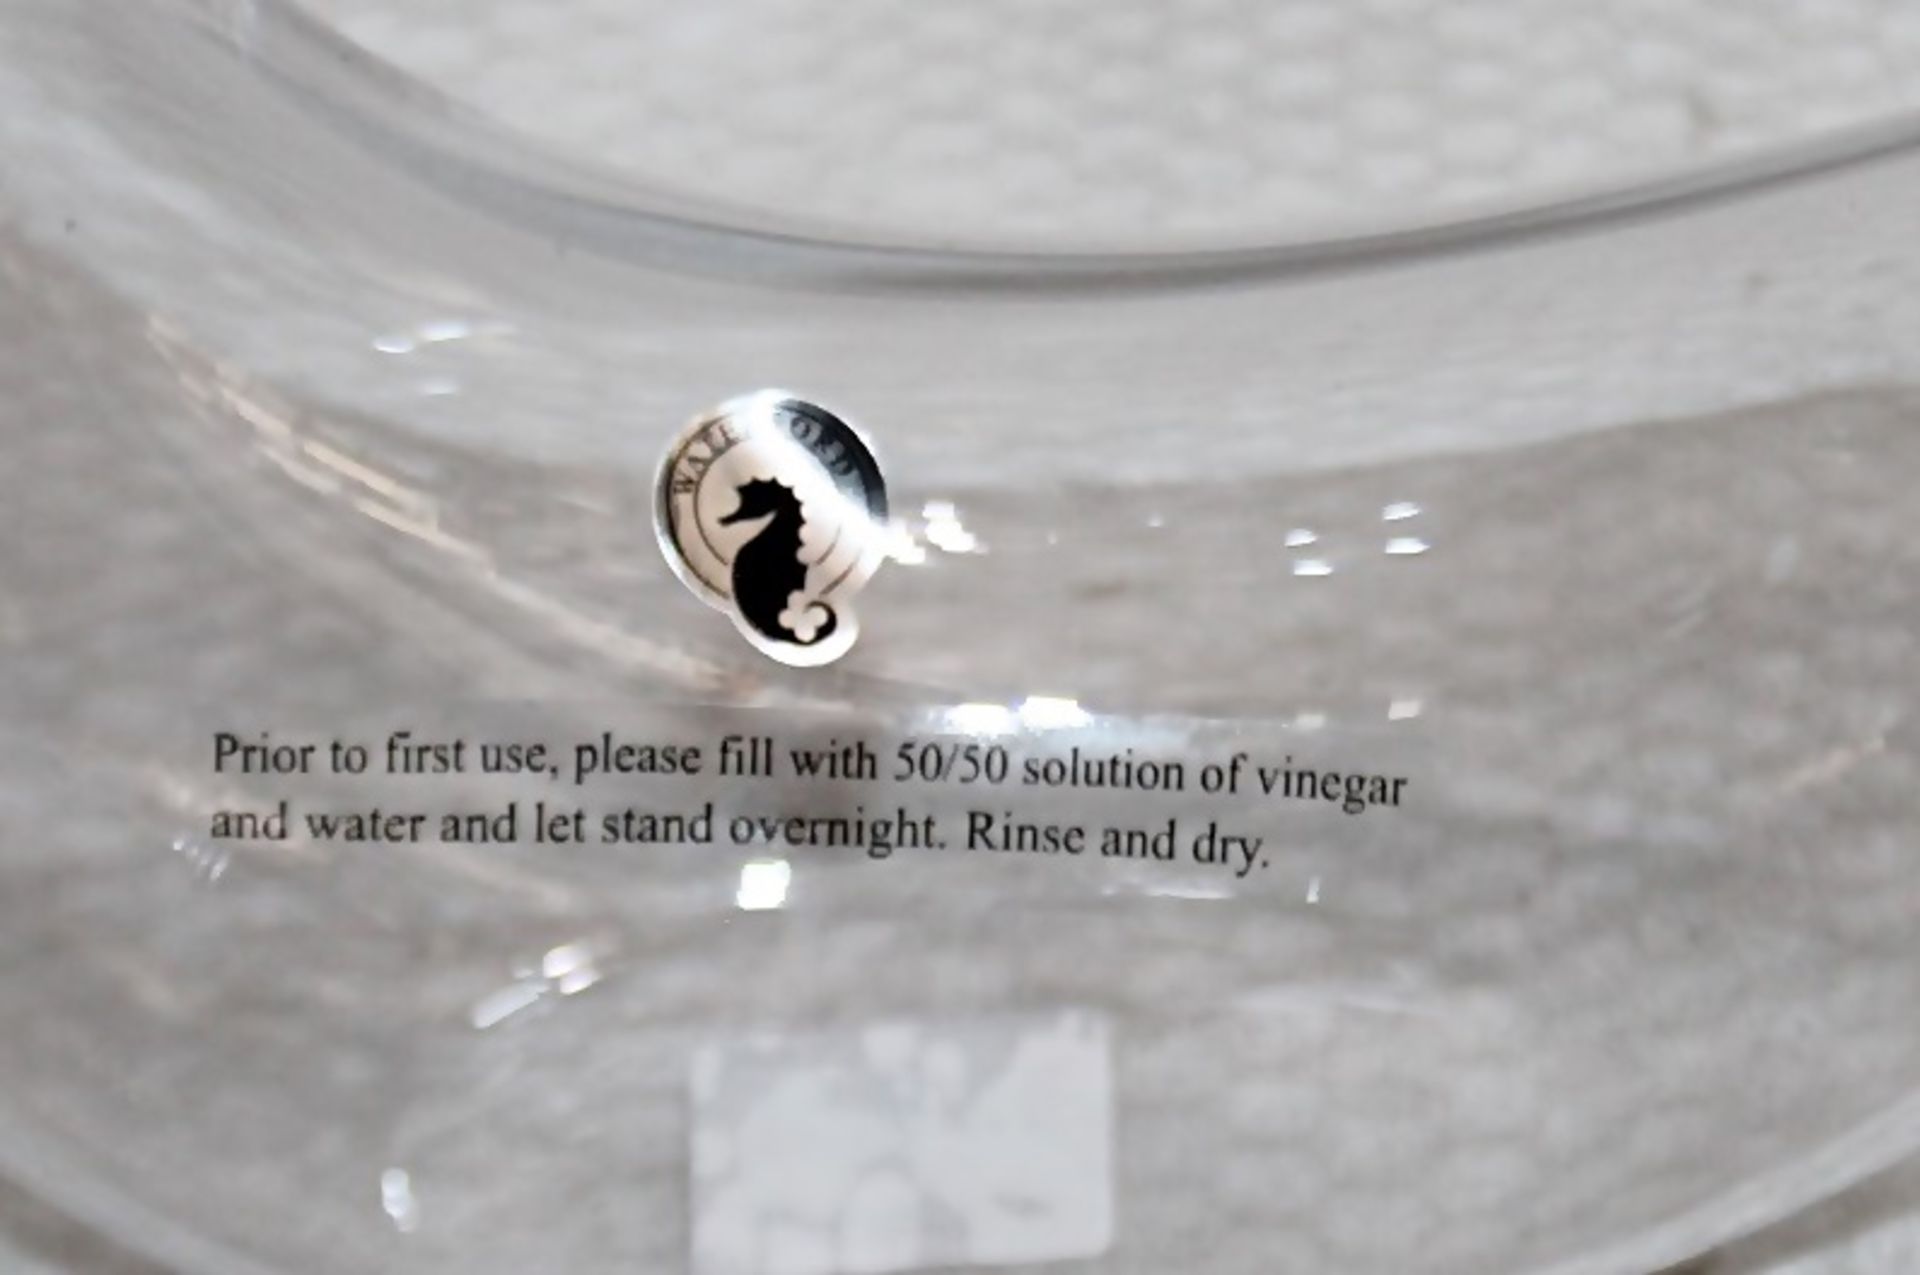 1 x WATERFORD CRYSTAL 'Elegance' Accent Decanter (1L) - Original Price £195.00 - Unused Boxed - Image 5 of 8